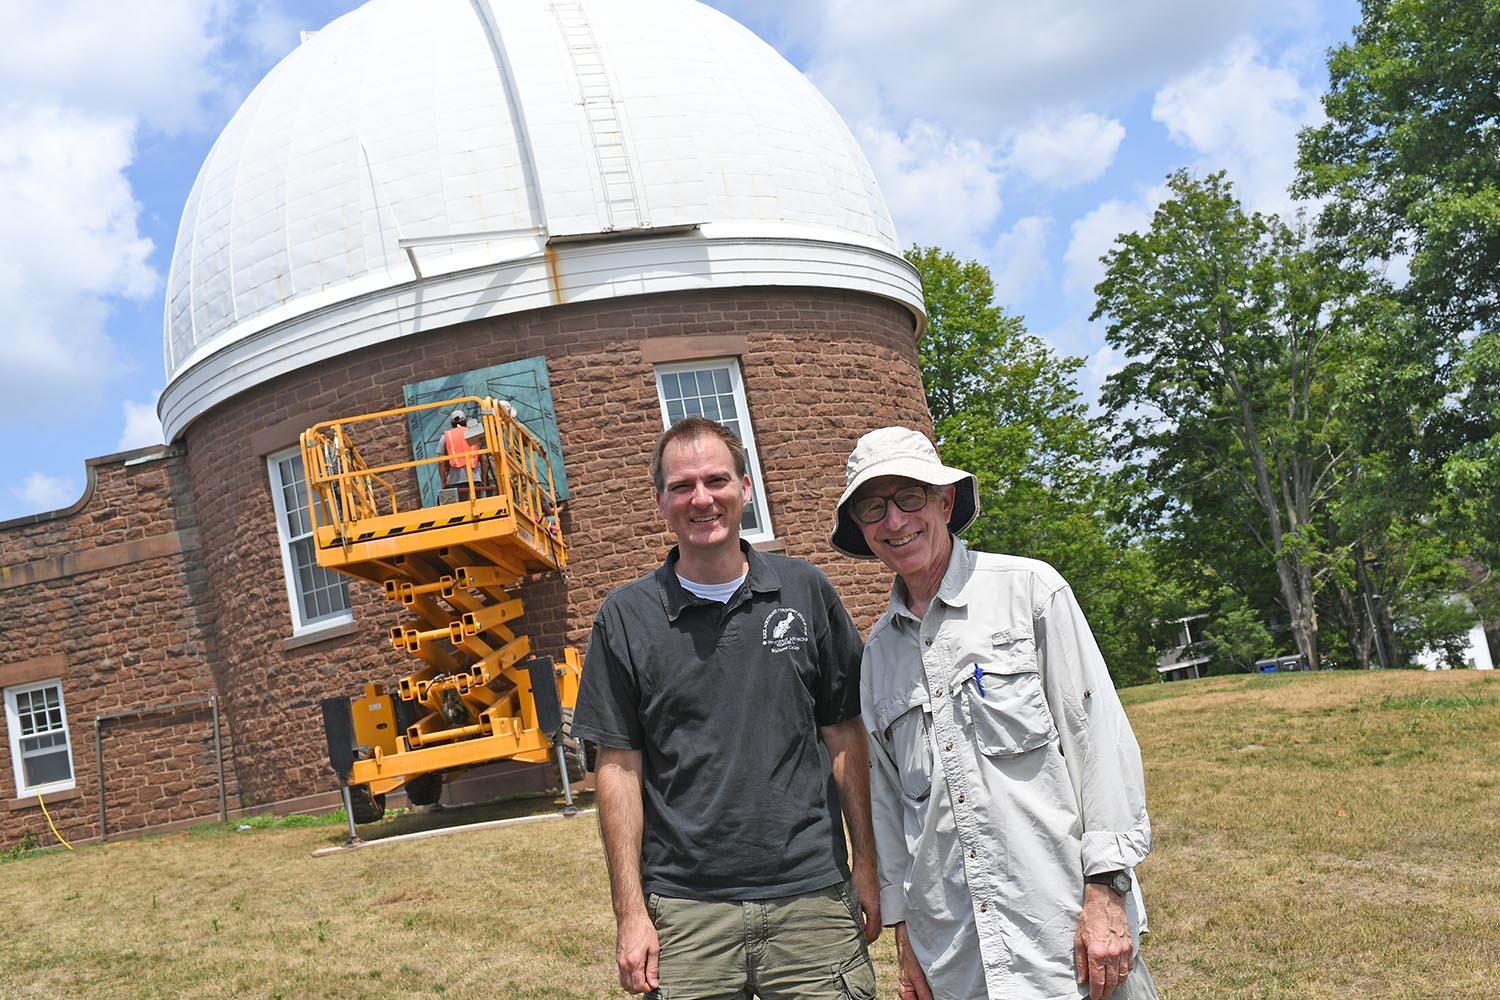 Seth Redfield, chair and associate professor of astronomy, associate professor of integrative sciences, and artist Robert Adzema observe a sundial's installation July 16 at the Van Vleck Observatory. Adzema, a maker of site-specific sundials, designed the sculpture to be placed at its exact location on the telescope's wall.